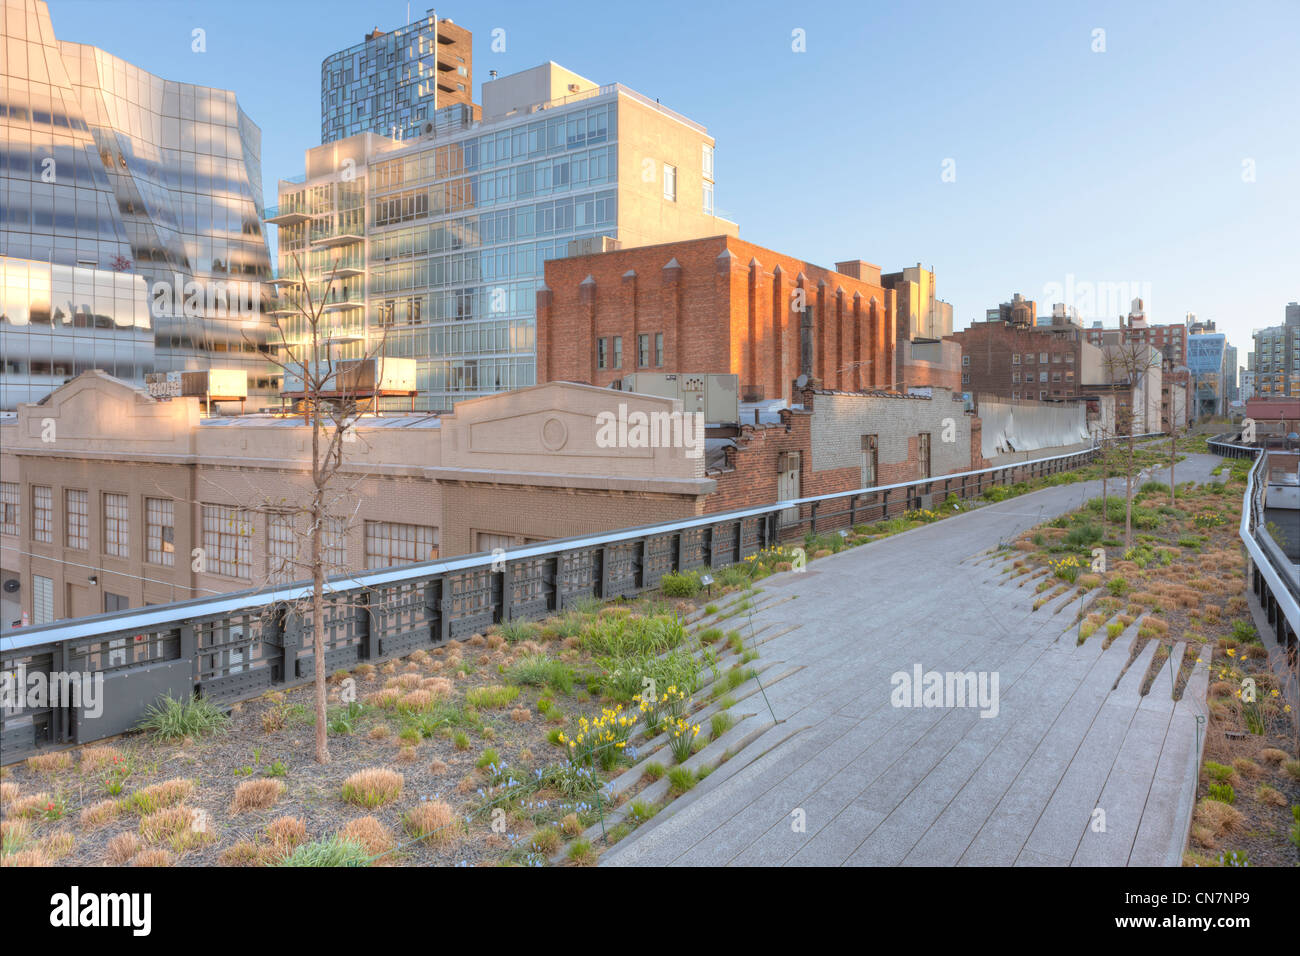 A view of the landscaping in High Line Park and the surrounding area in New York City. Stock Photo